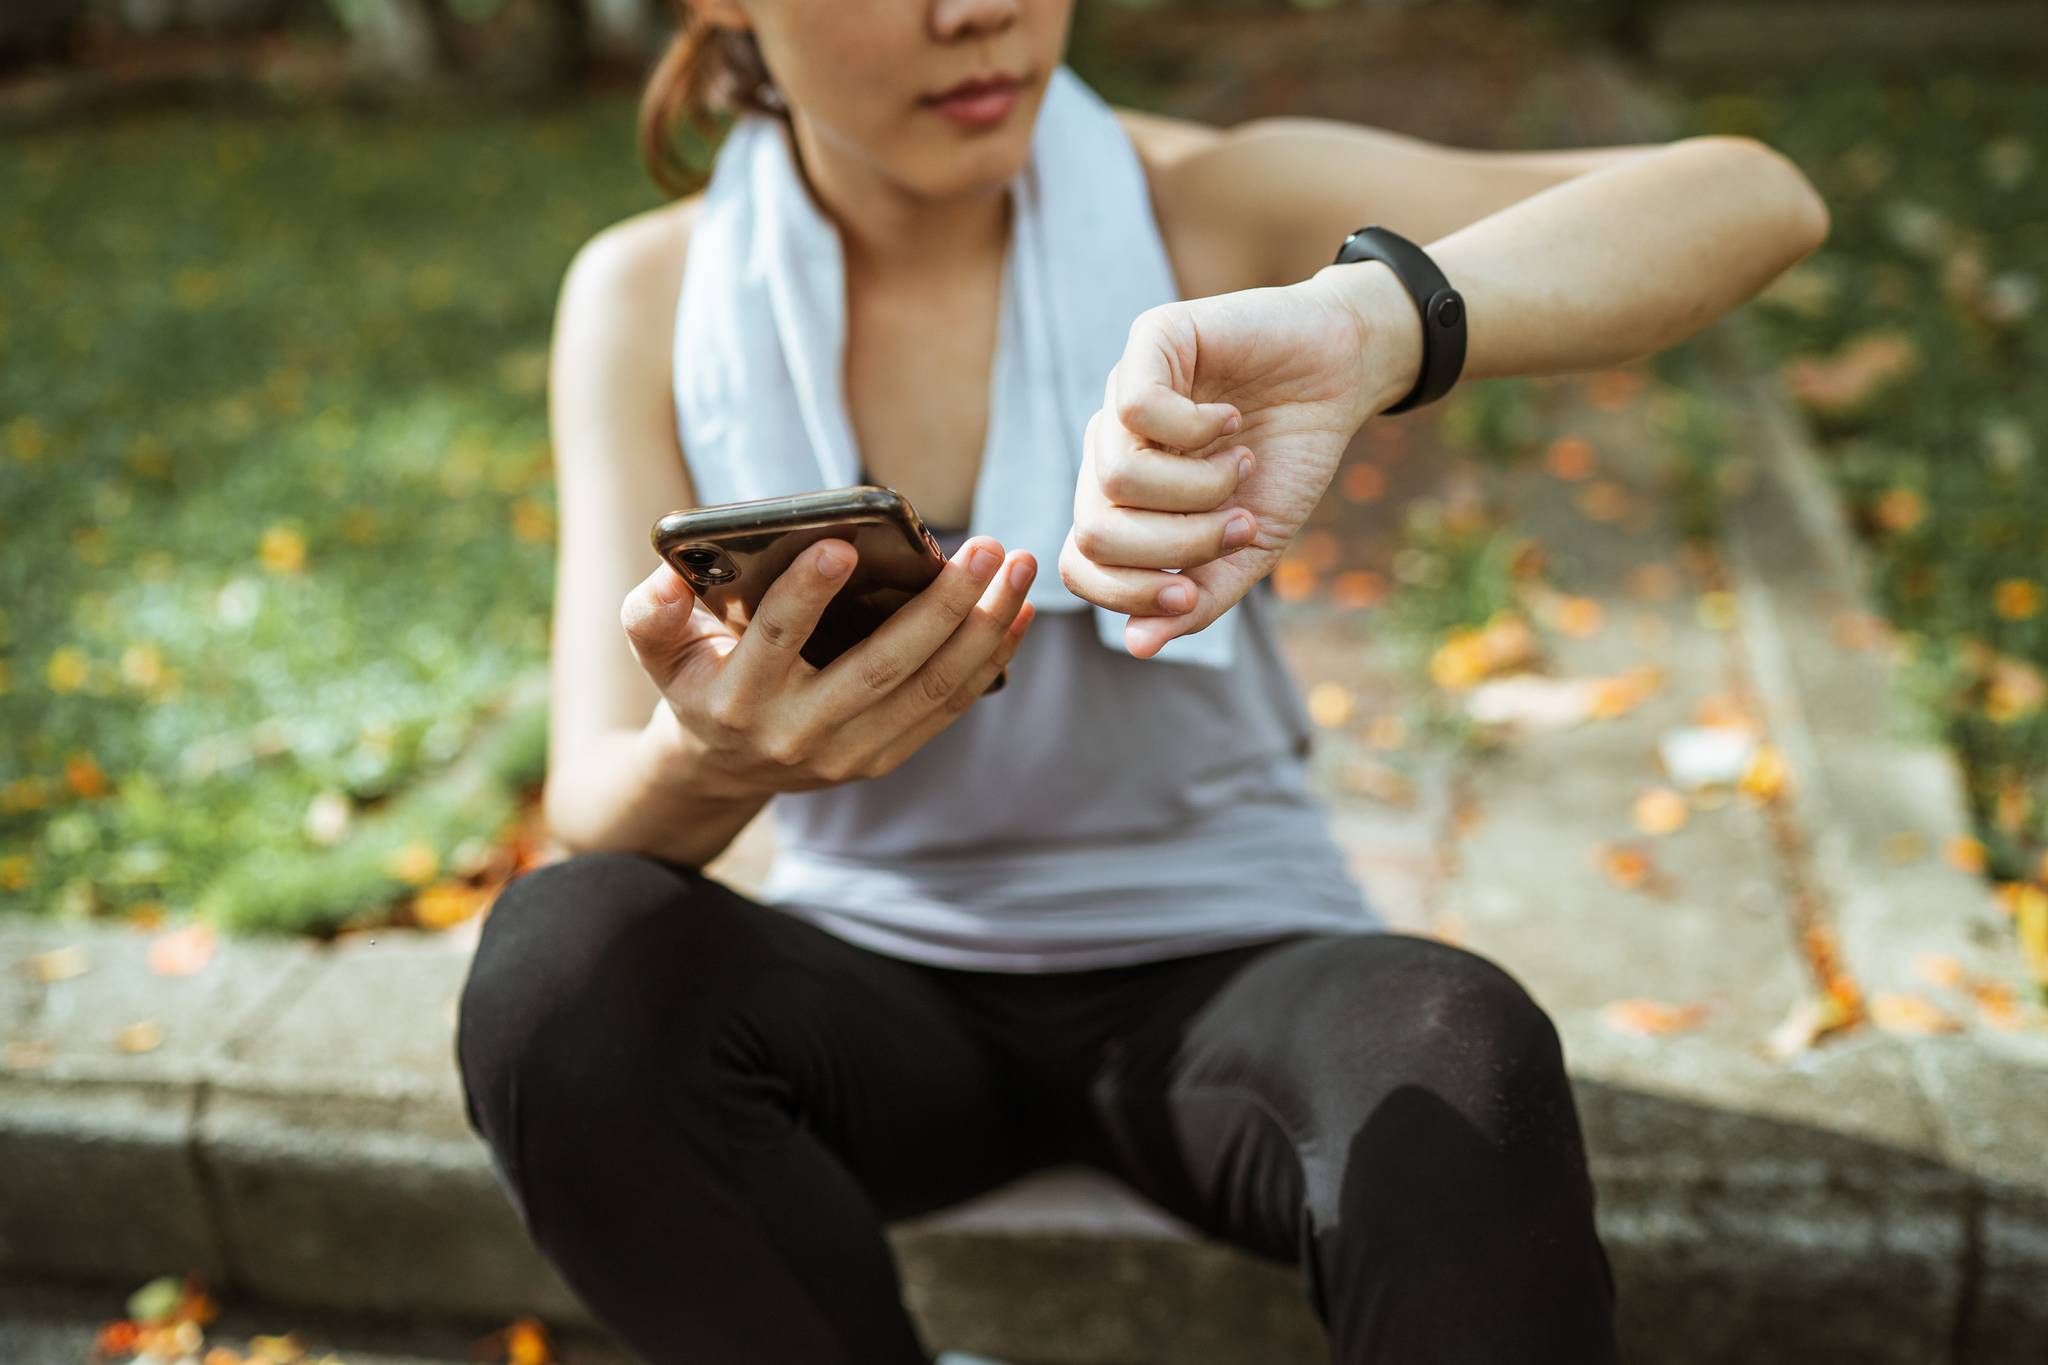 Why are Australians embracing health and fitness tech?